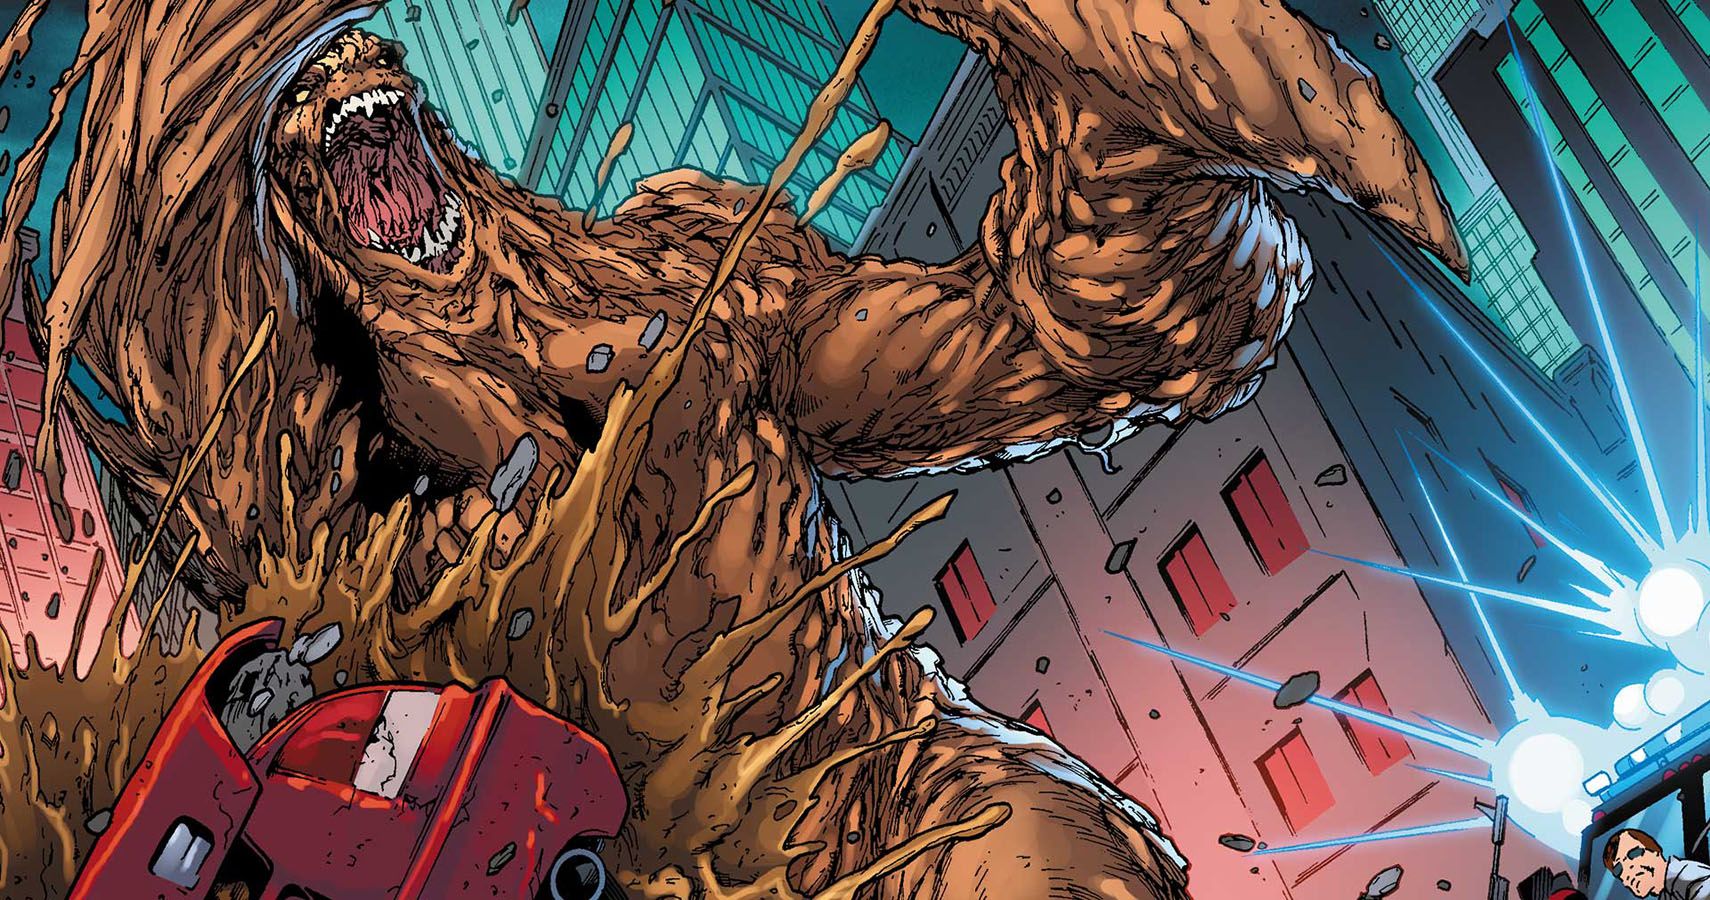 Some lesser-known facts about Clayface